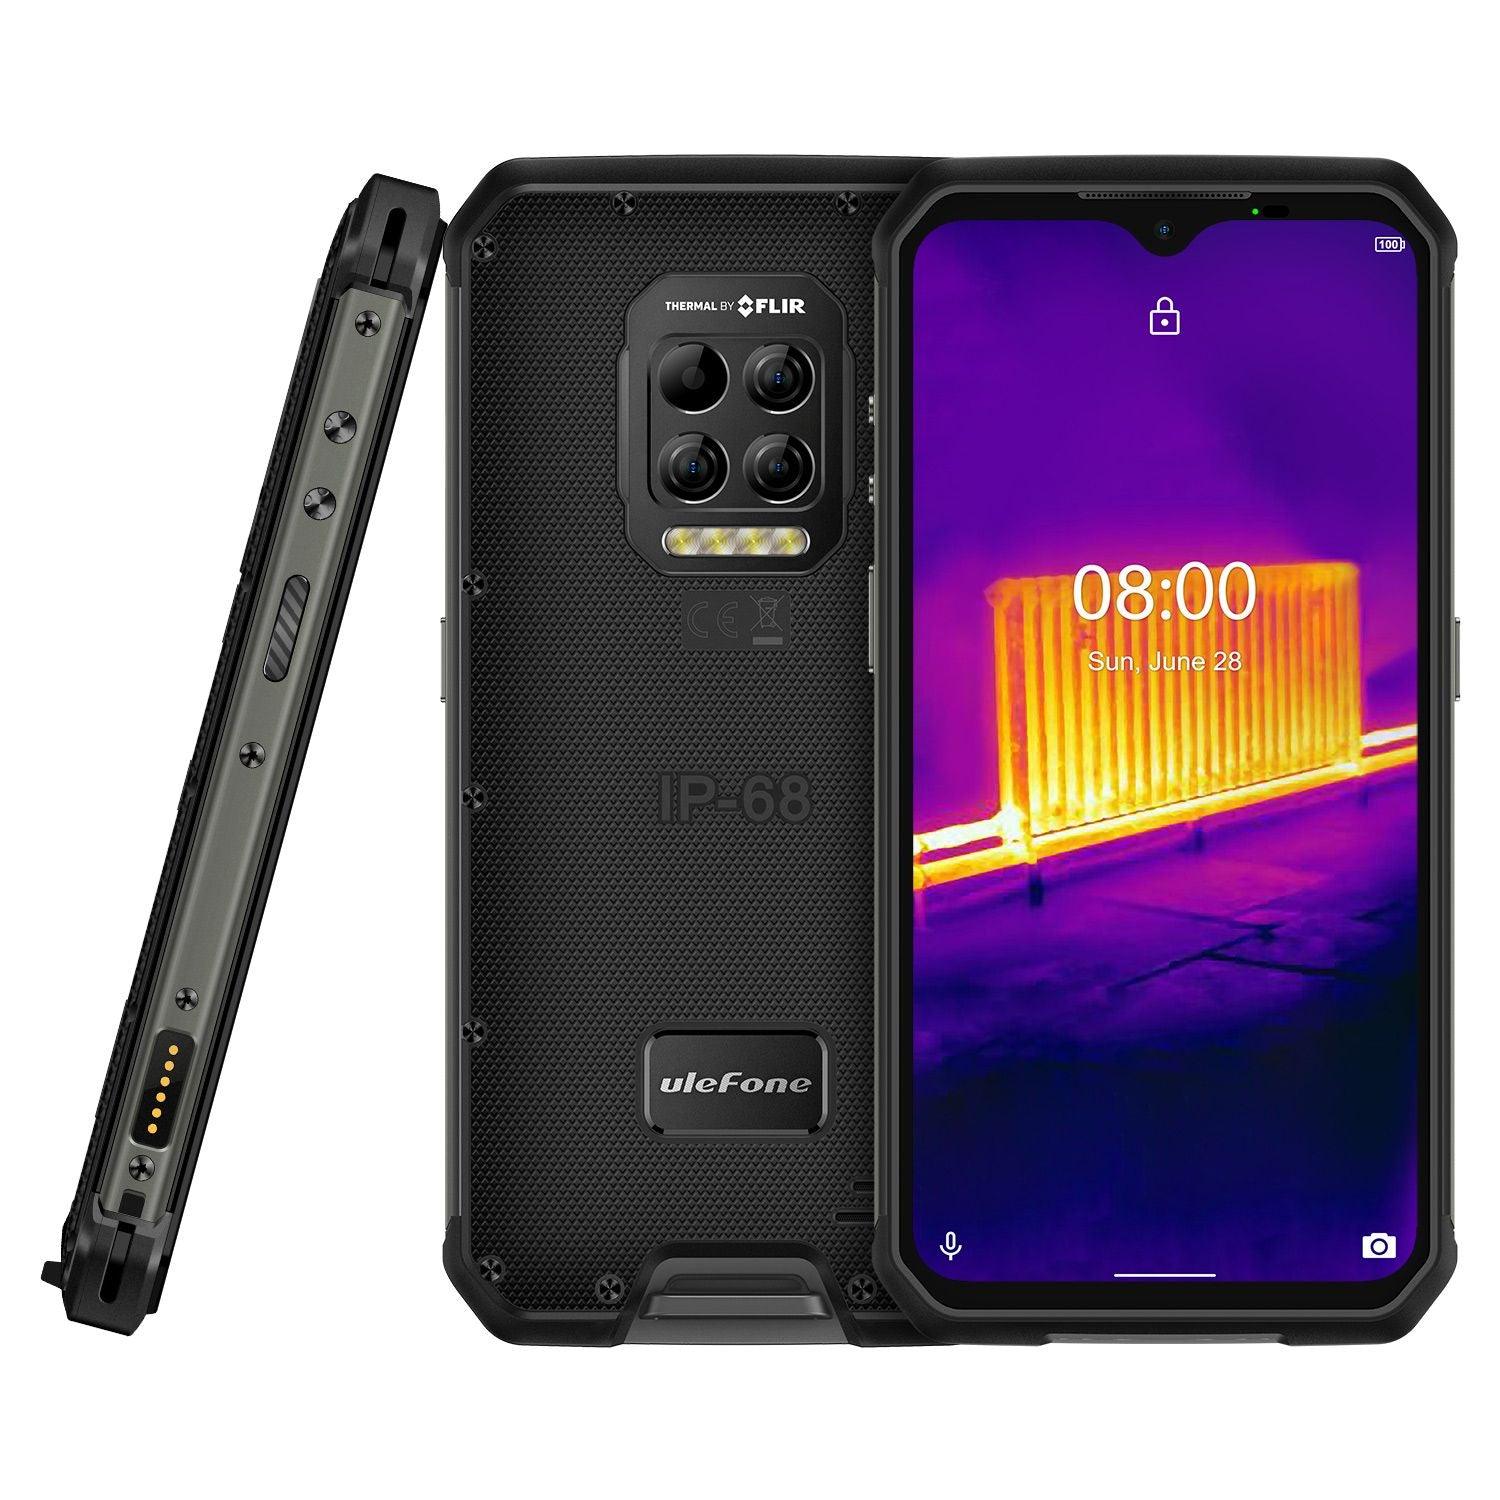 Ulefone Armor 9 Dual 4G Smartphone With Thermal Imaging CameraUlefone Armor 9 Dual 4G Smartphone With Thermal Imaging Camera